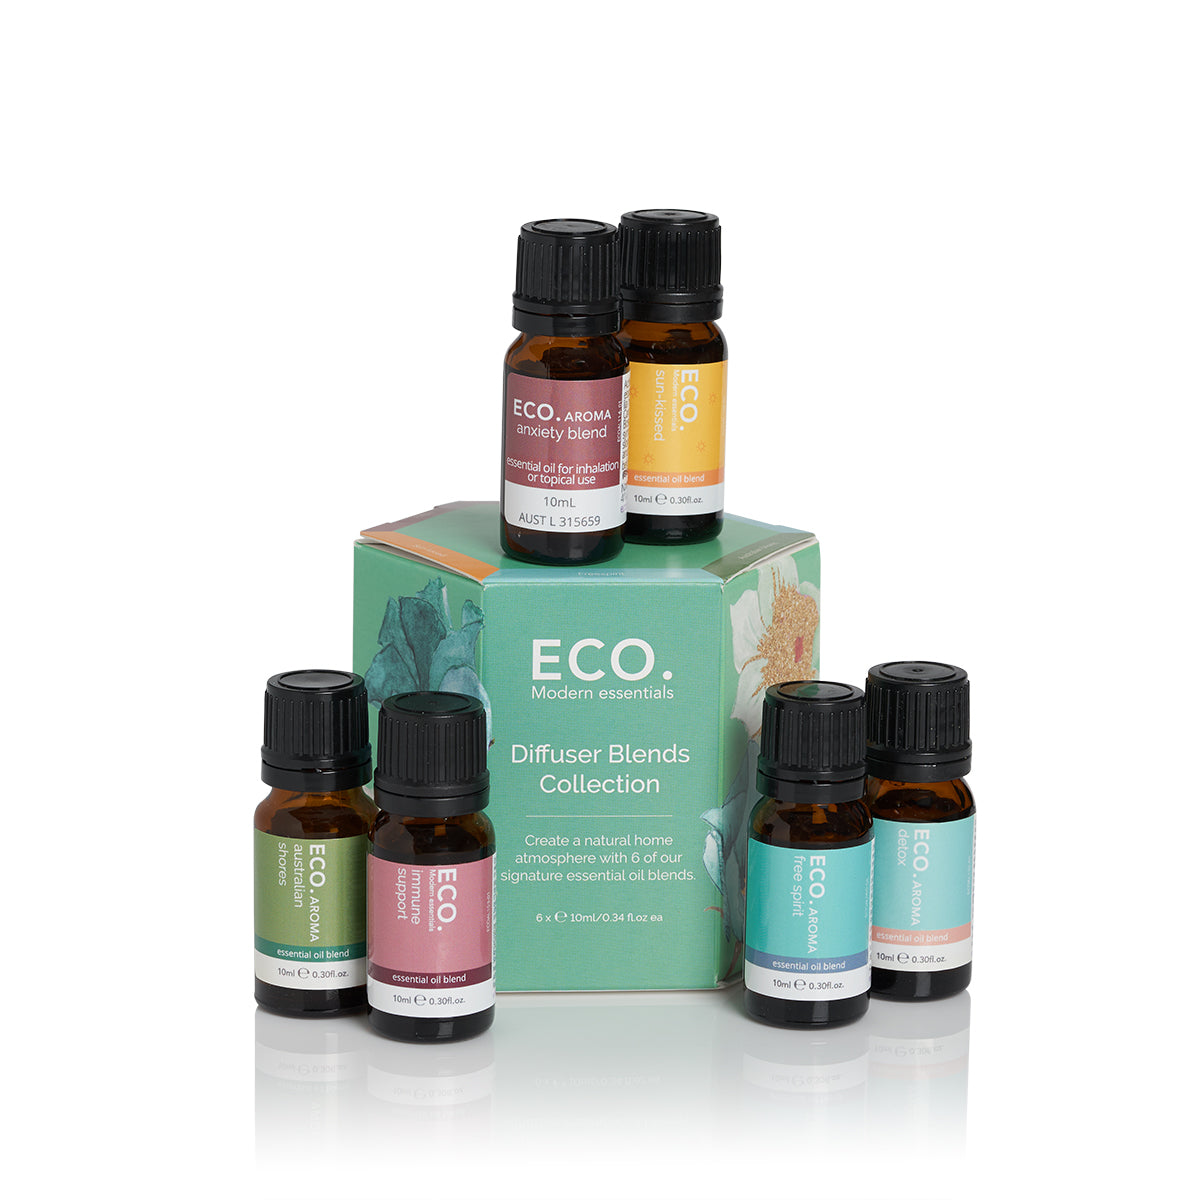 ECO. Diffuser Essential Oil Blends 6 Pack